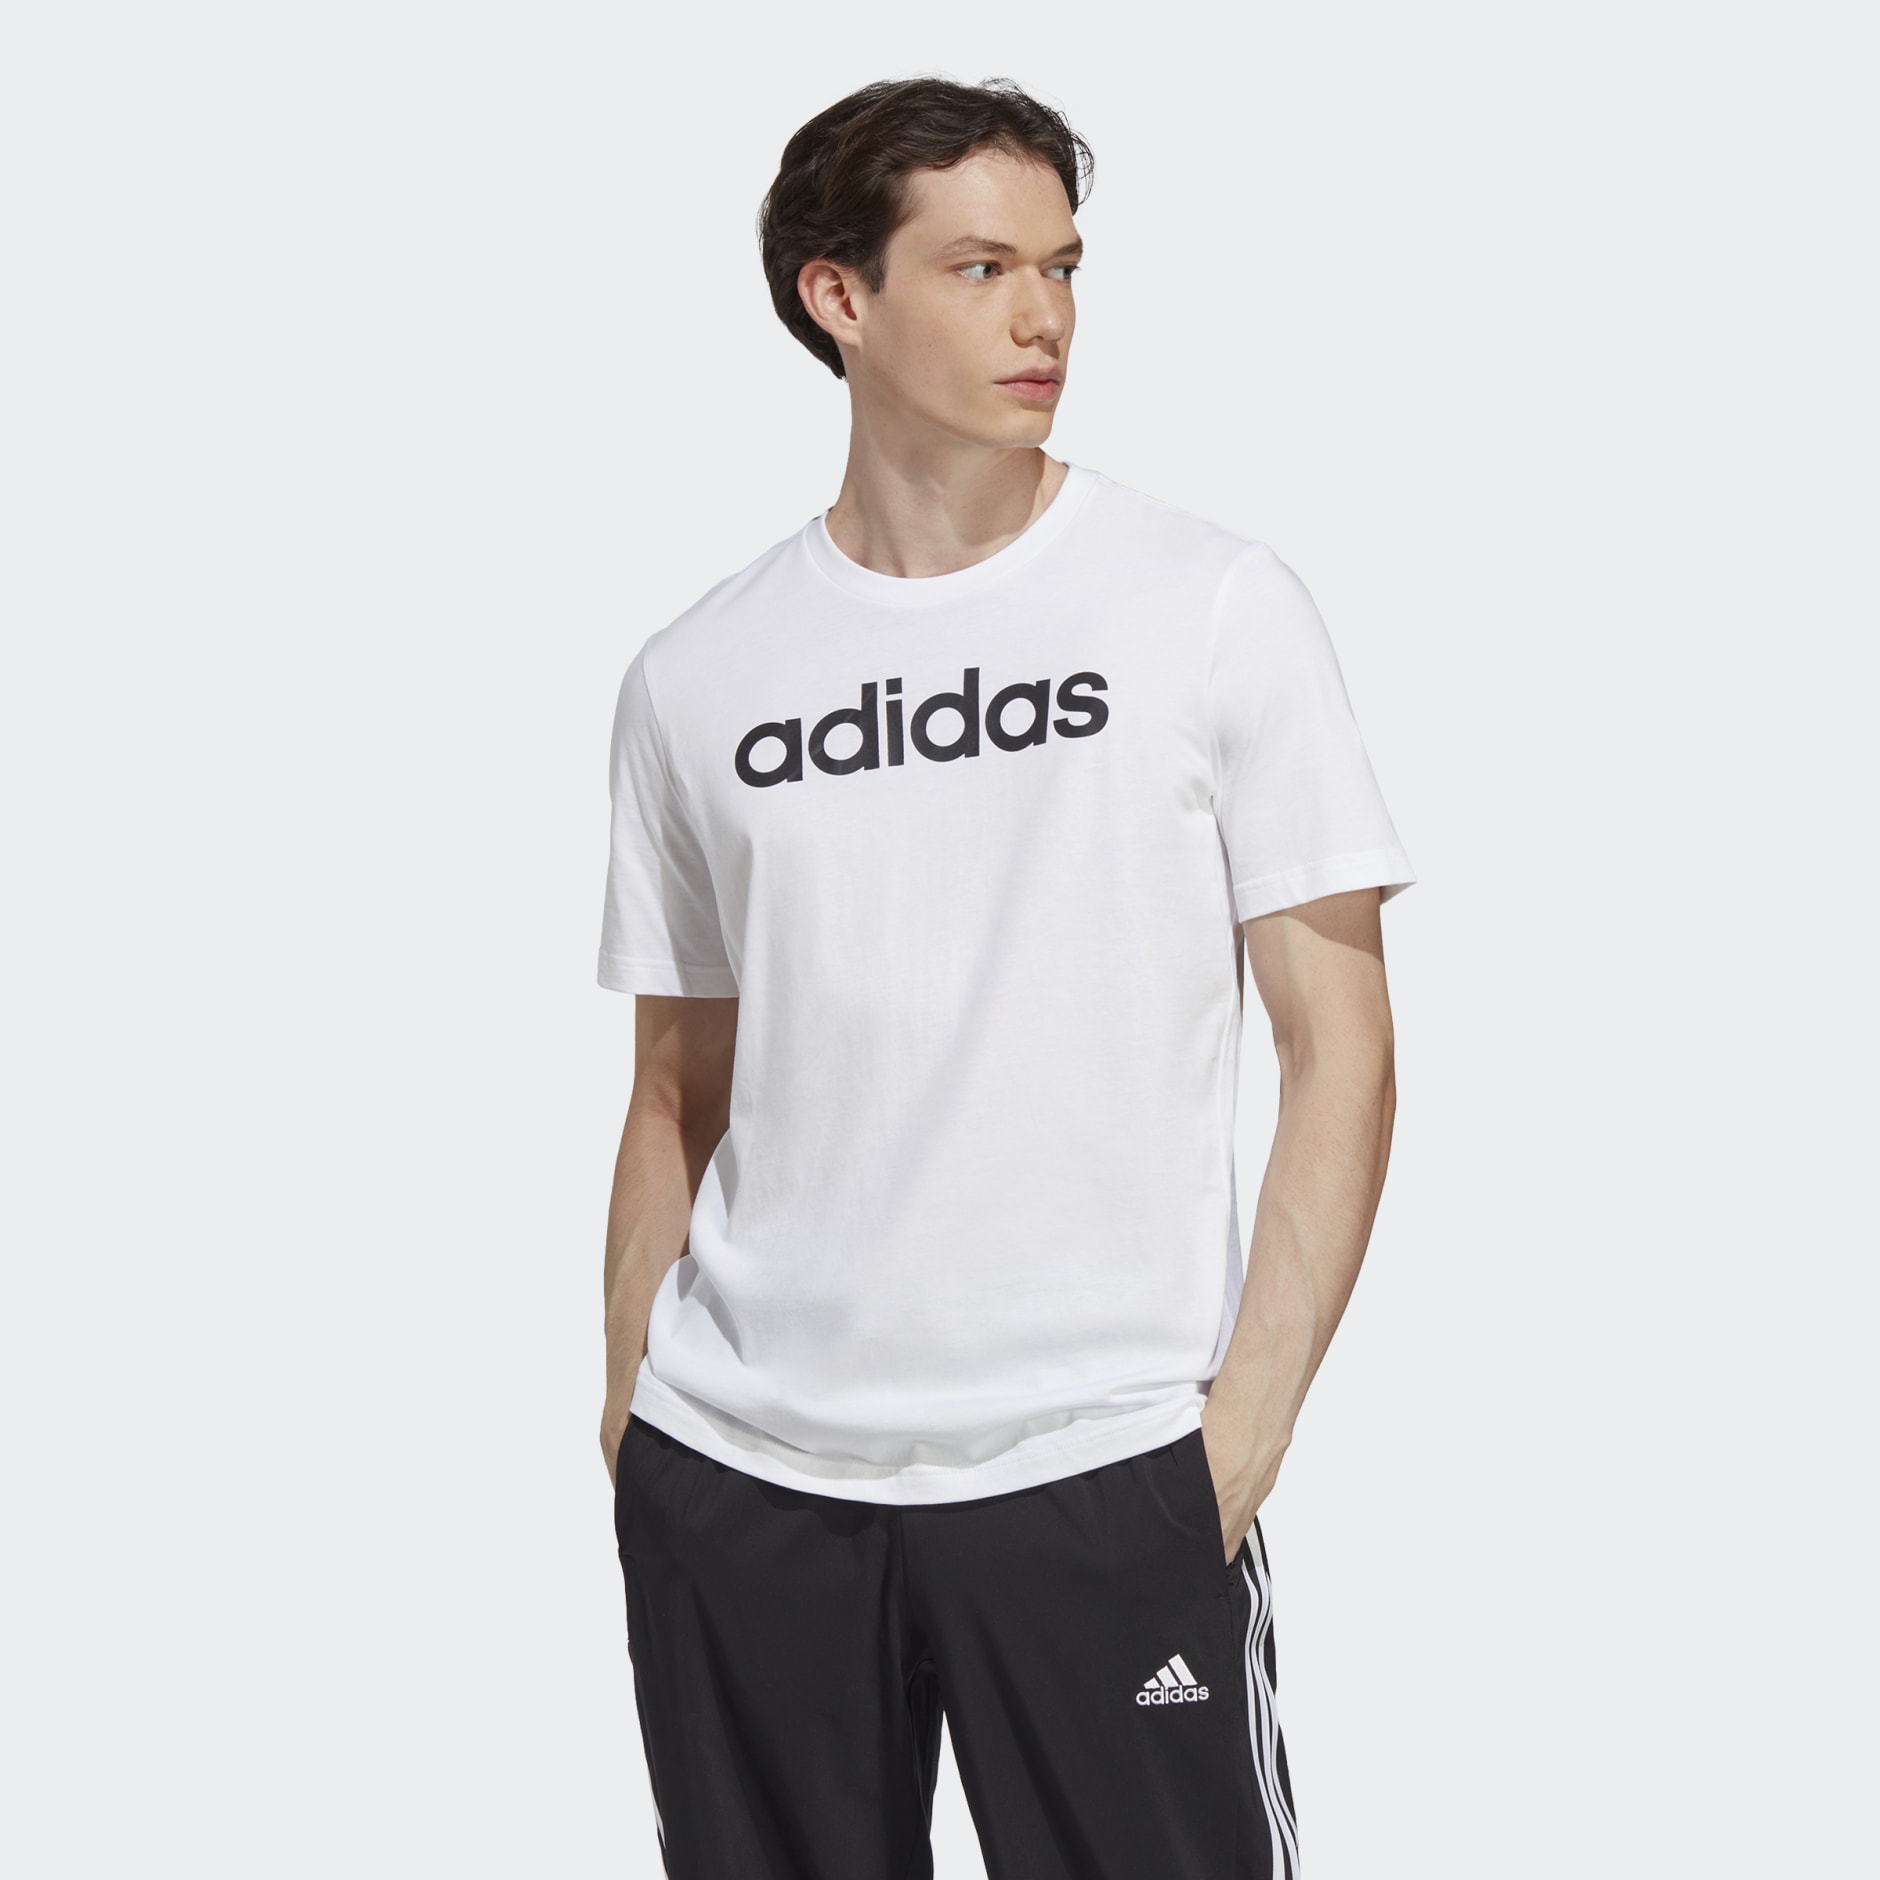 Tee Essentials Jersey - | Embroidered White GH Logo adidas adidas Linear Single